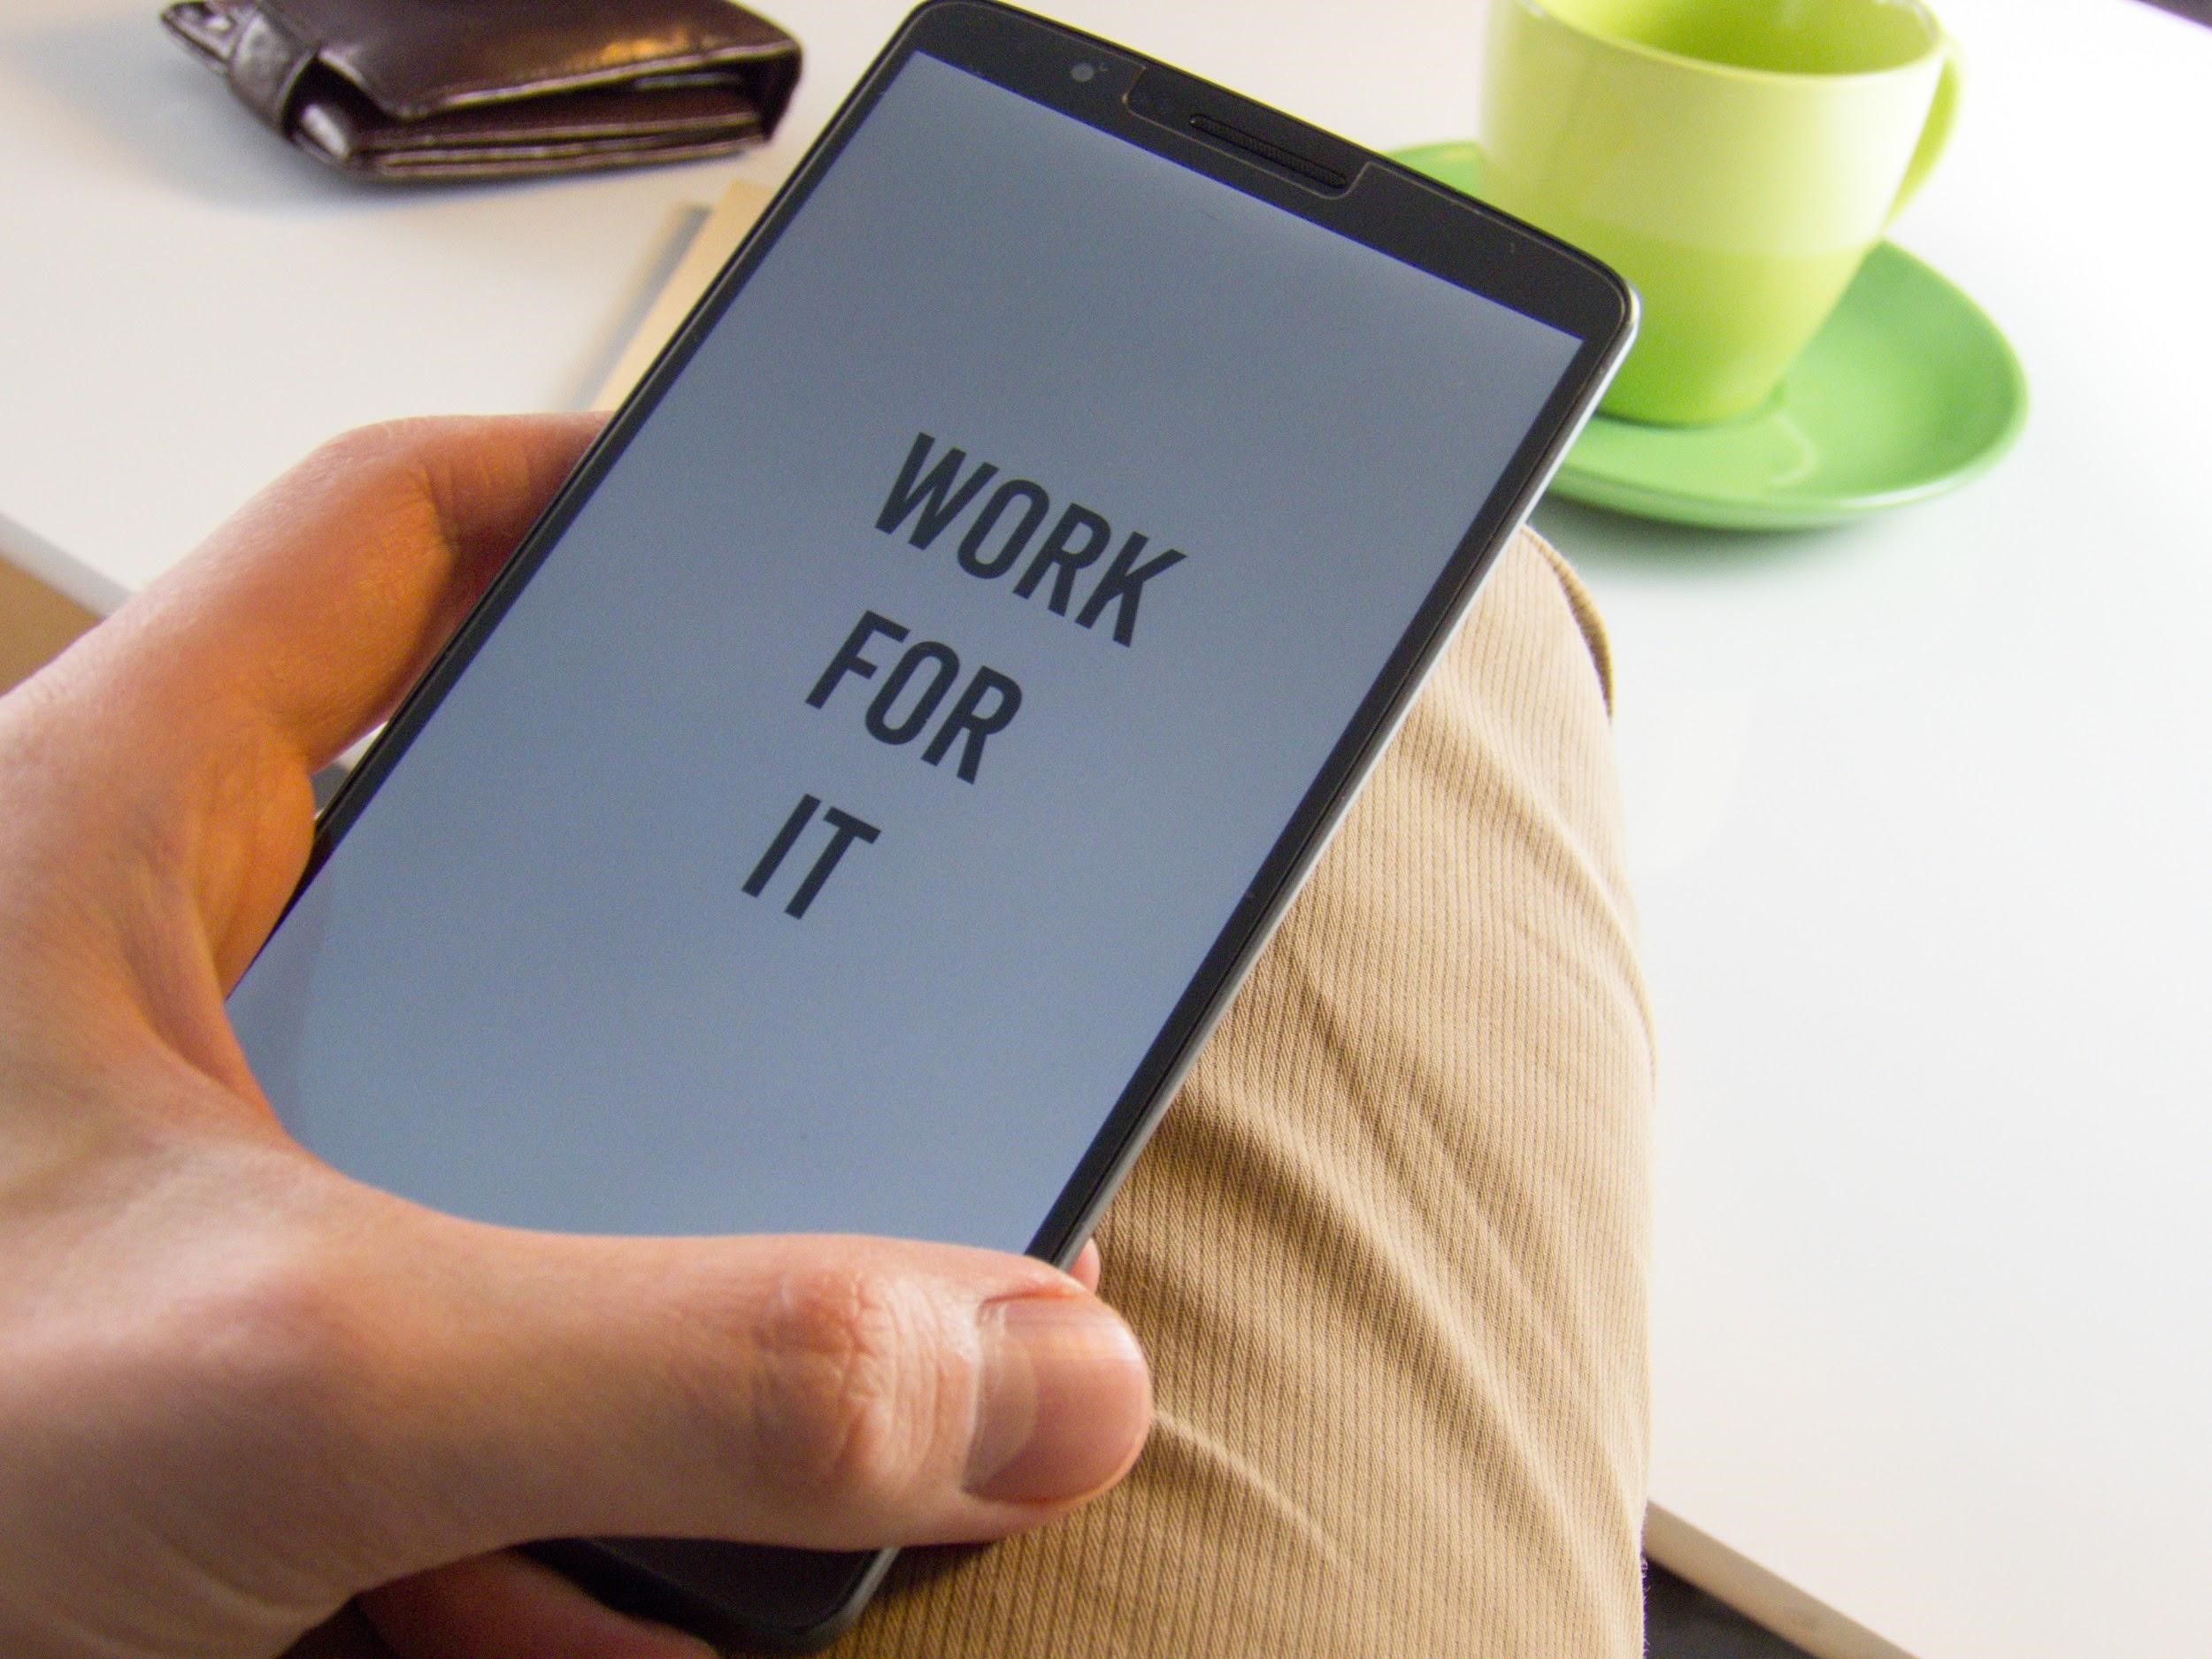 work for it-cellphone-business